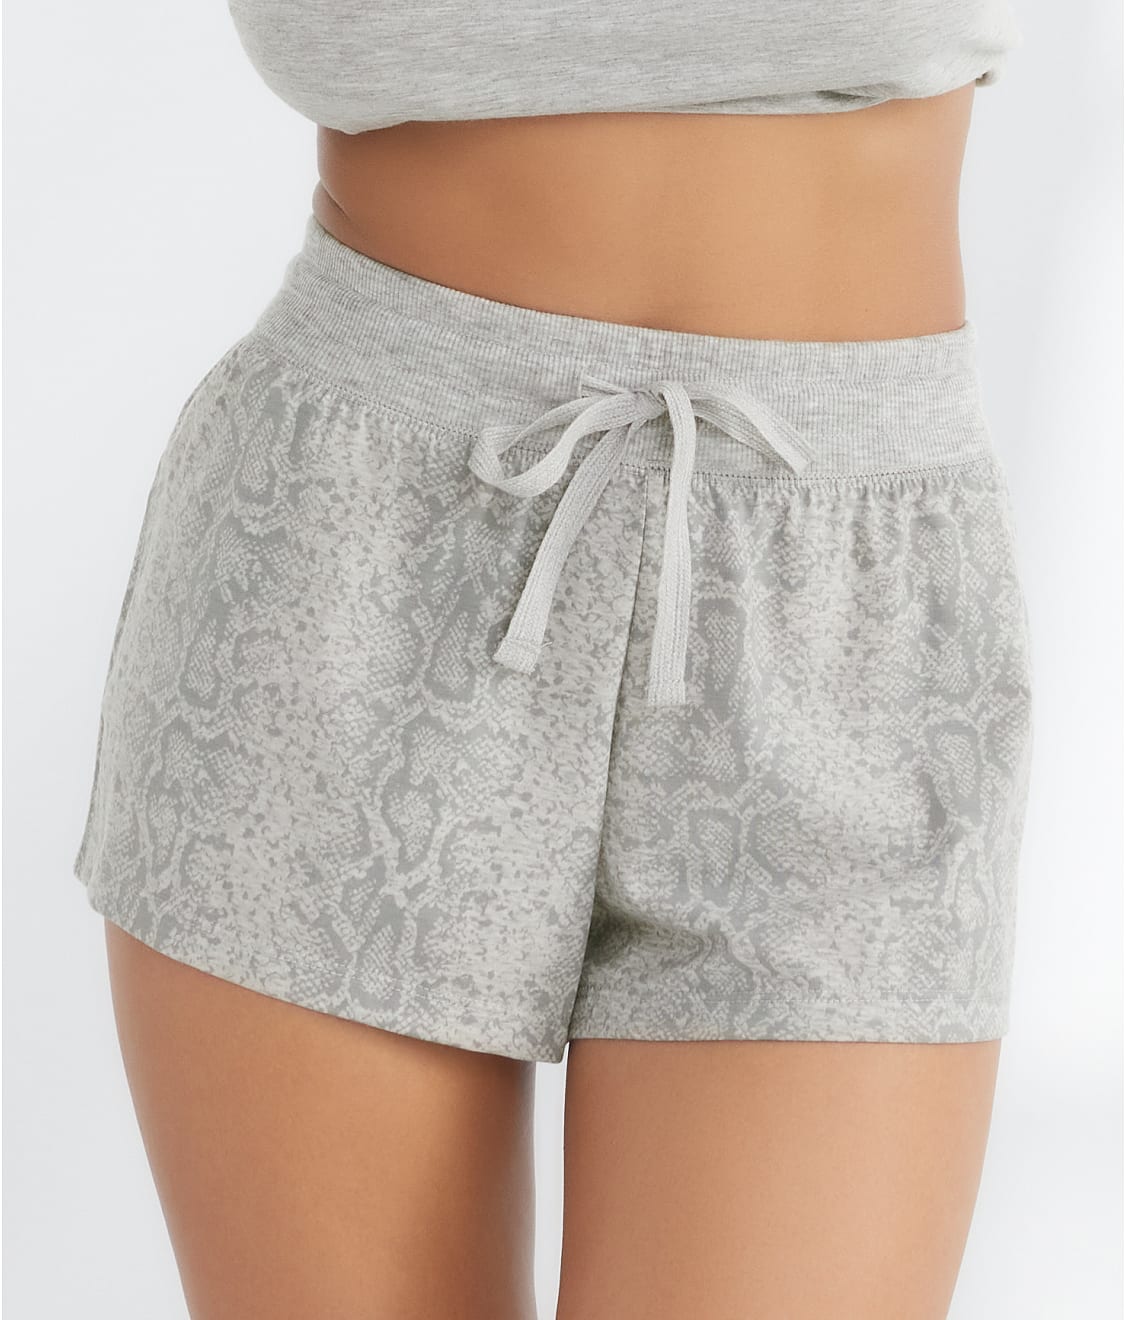 Bare Necessities: Relax, Recharge, Recycled Knit Shorts DRJ477